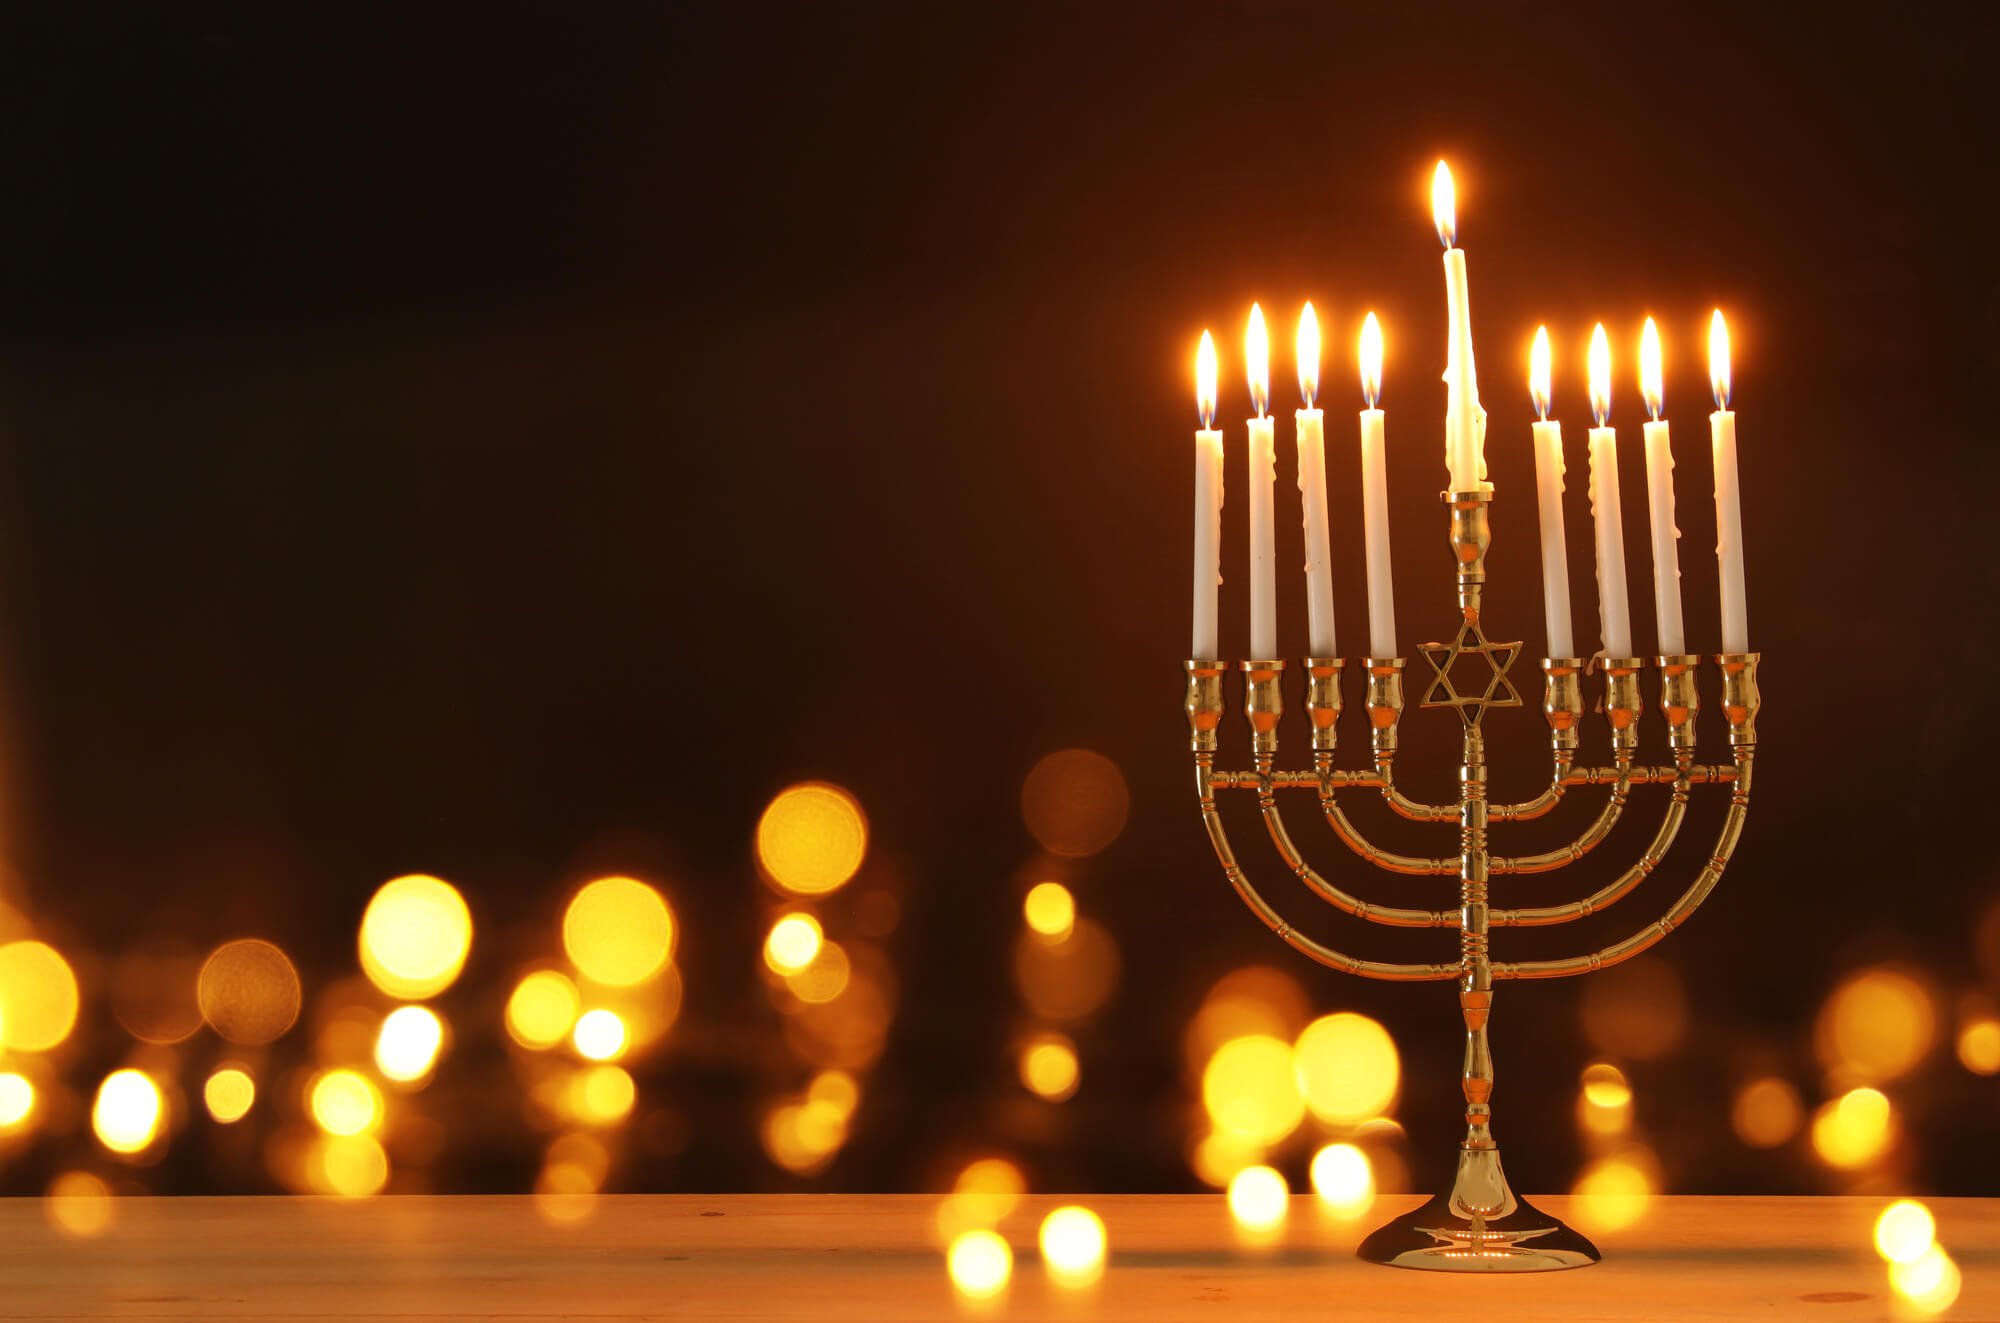 Jewish candles on a table against a dark background